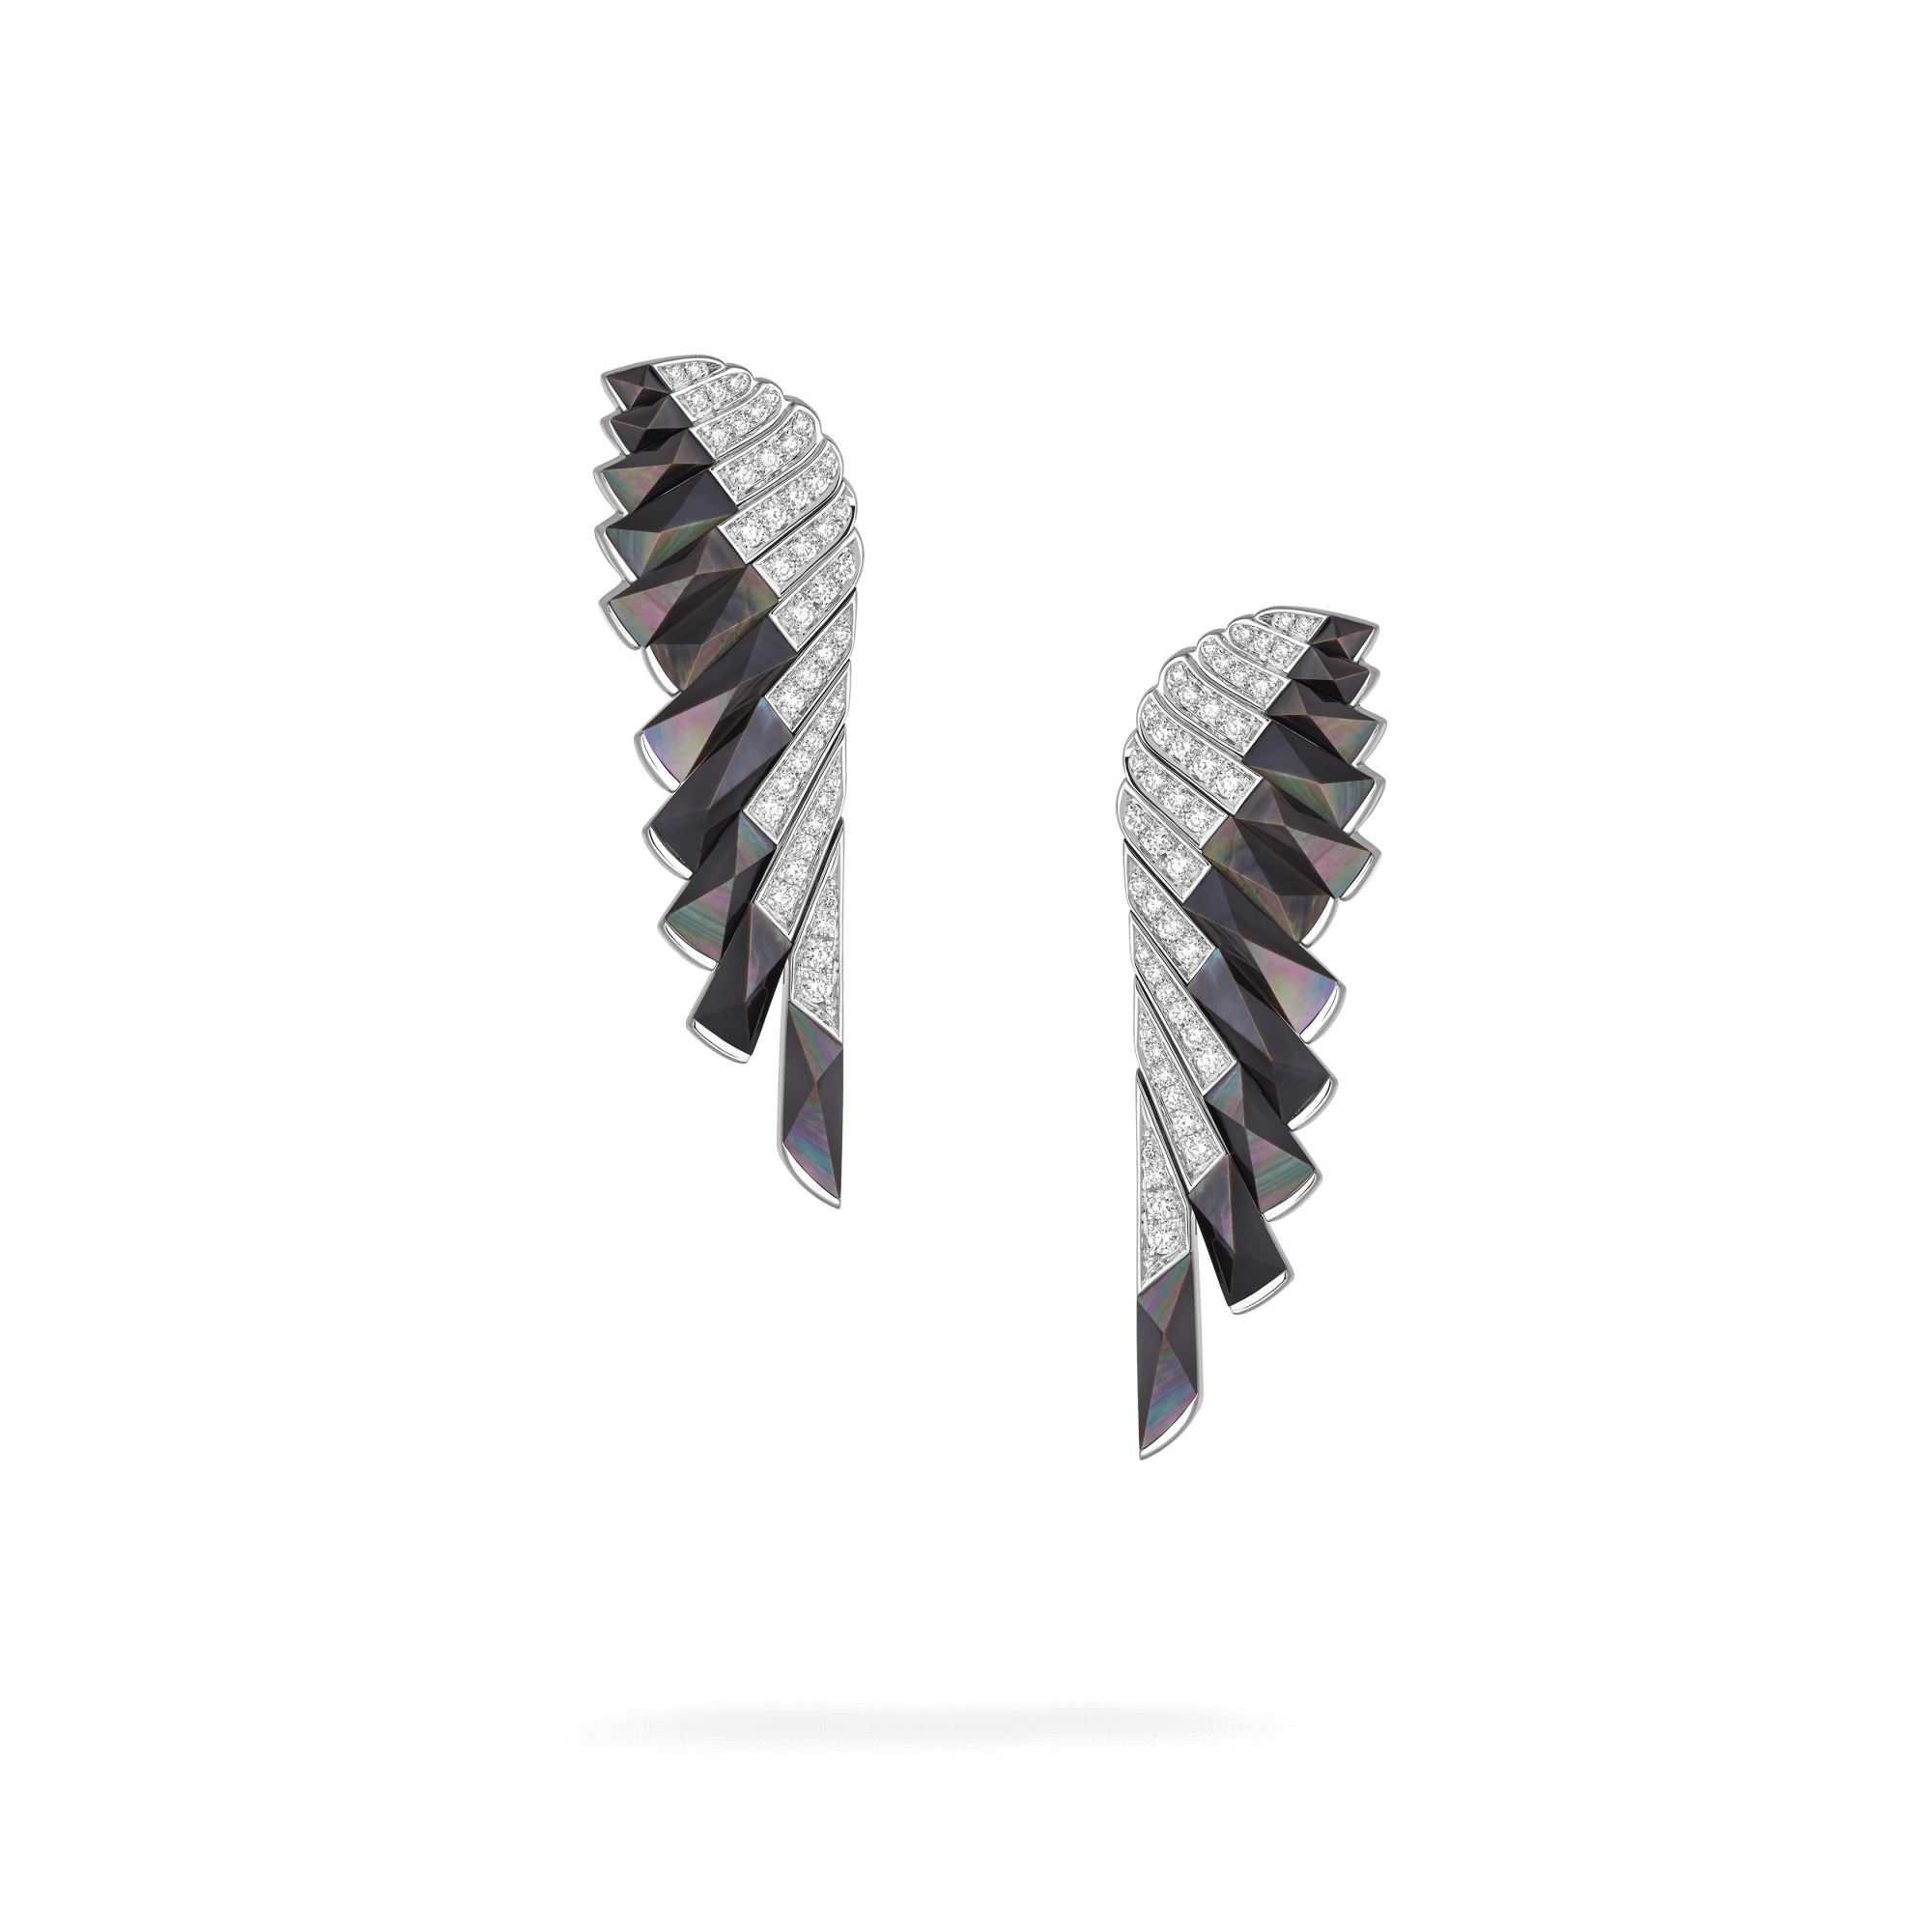 Garrard Wings Rising collection Earrings in 18ct White Gold with Diamonds and Black Mother of Pearl 2018617 Hero View